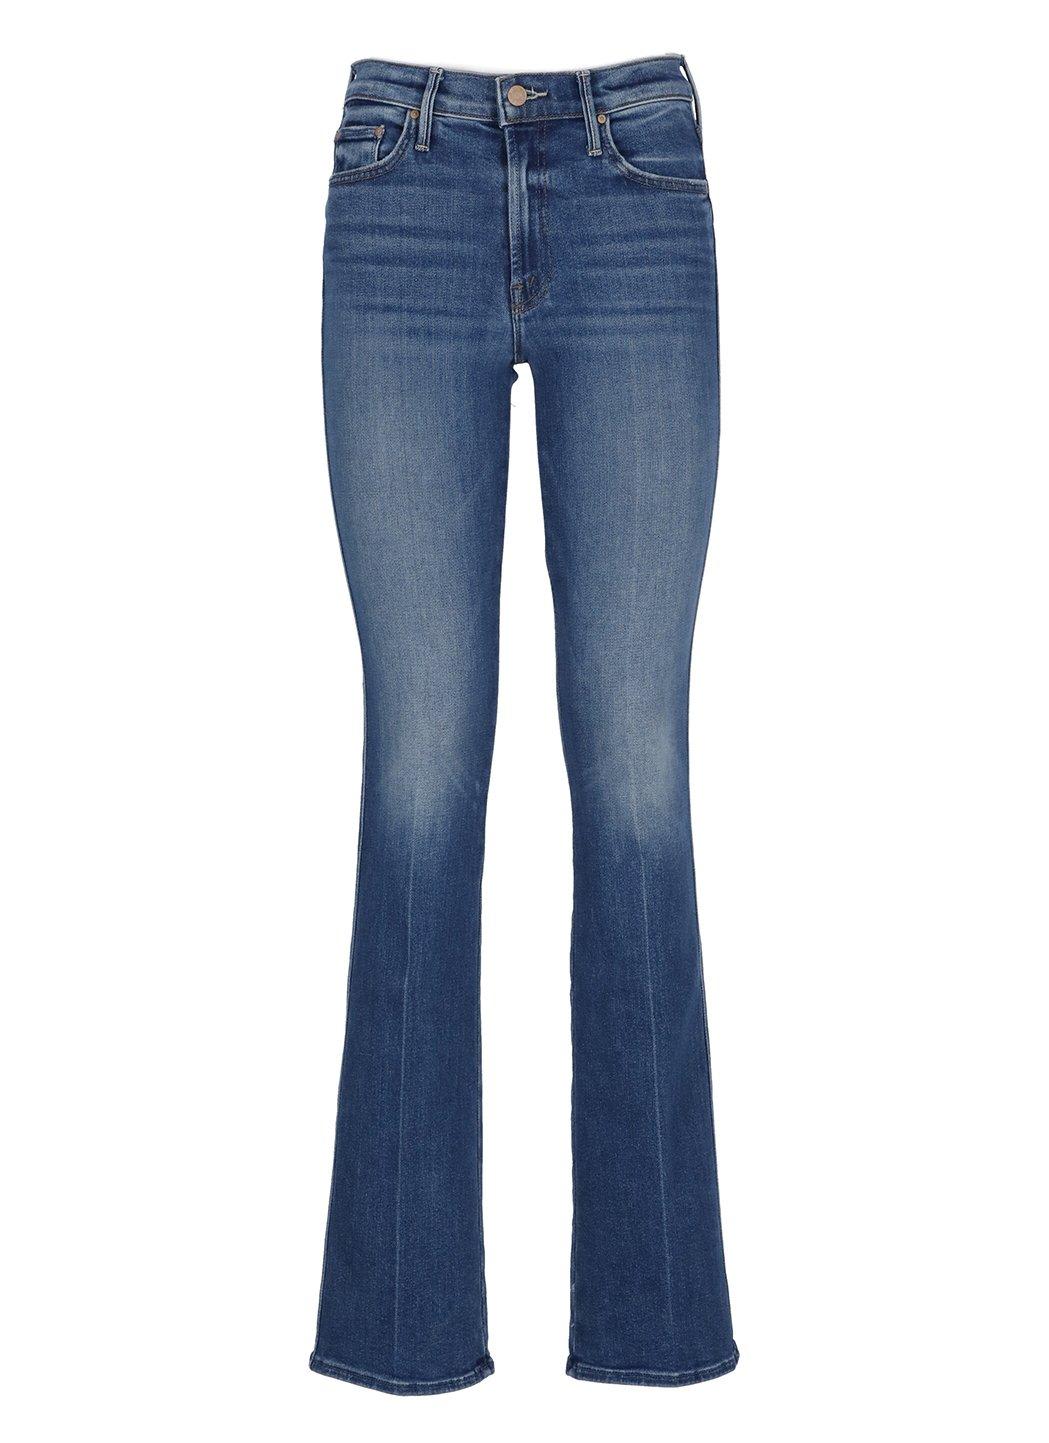 MOTHER THE DOUBLE INSIDER HEEL BOOTCUT JEANS